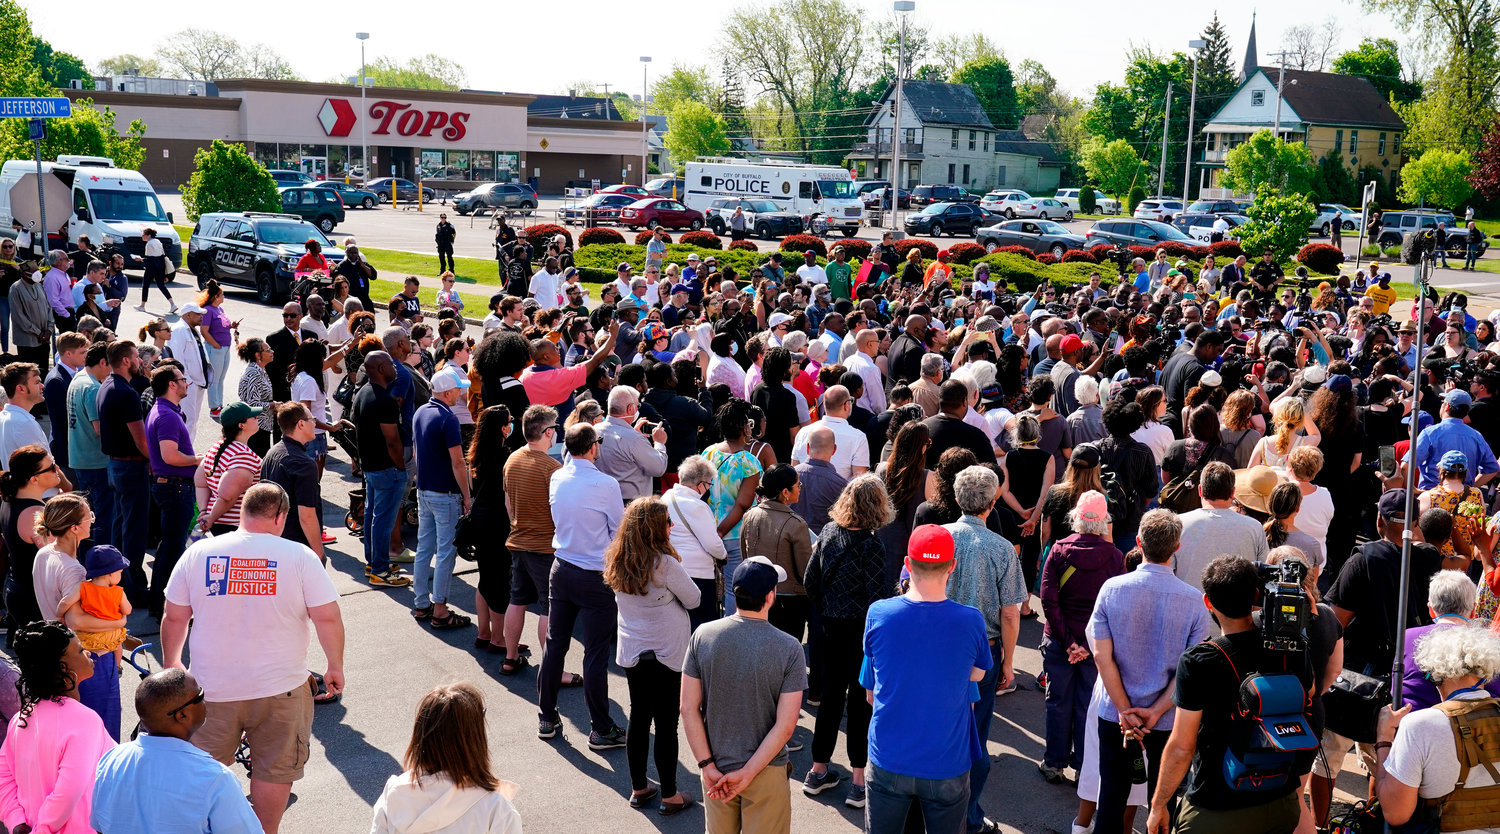 People gather outside the scene of a shooting at a supermarket in Buffalo, N.Y., Sunday, May 15, 2022. (AP Photo/Matt Rourke)